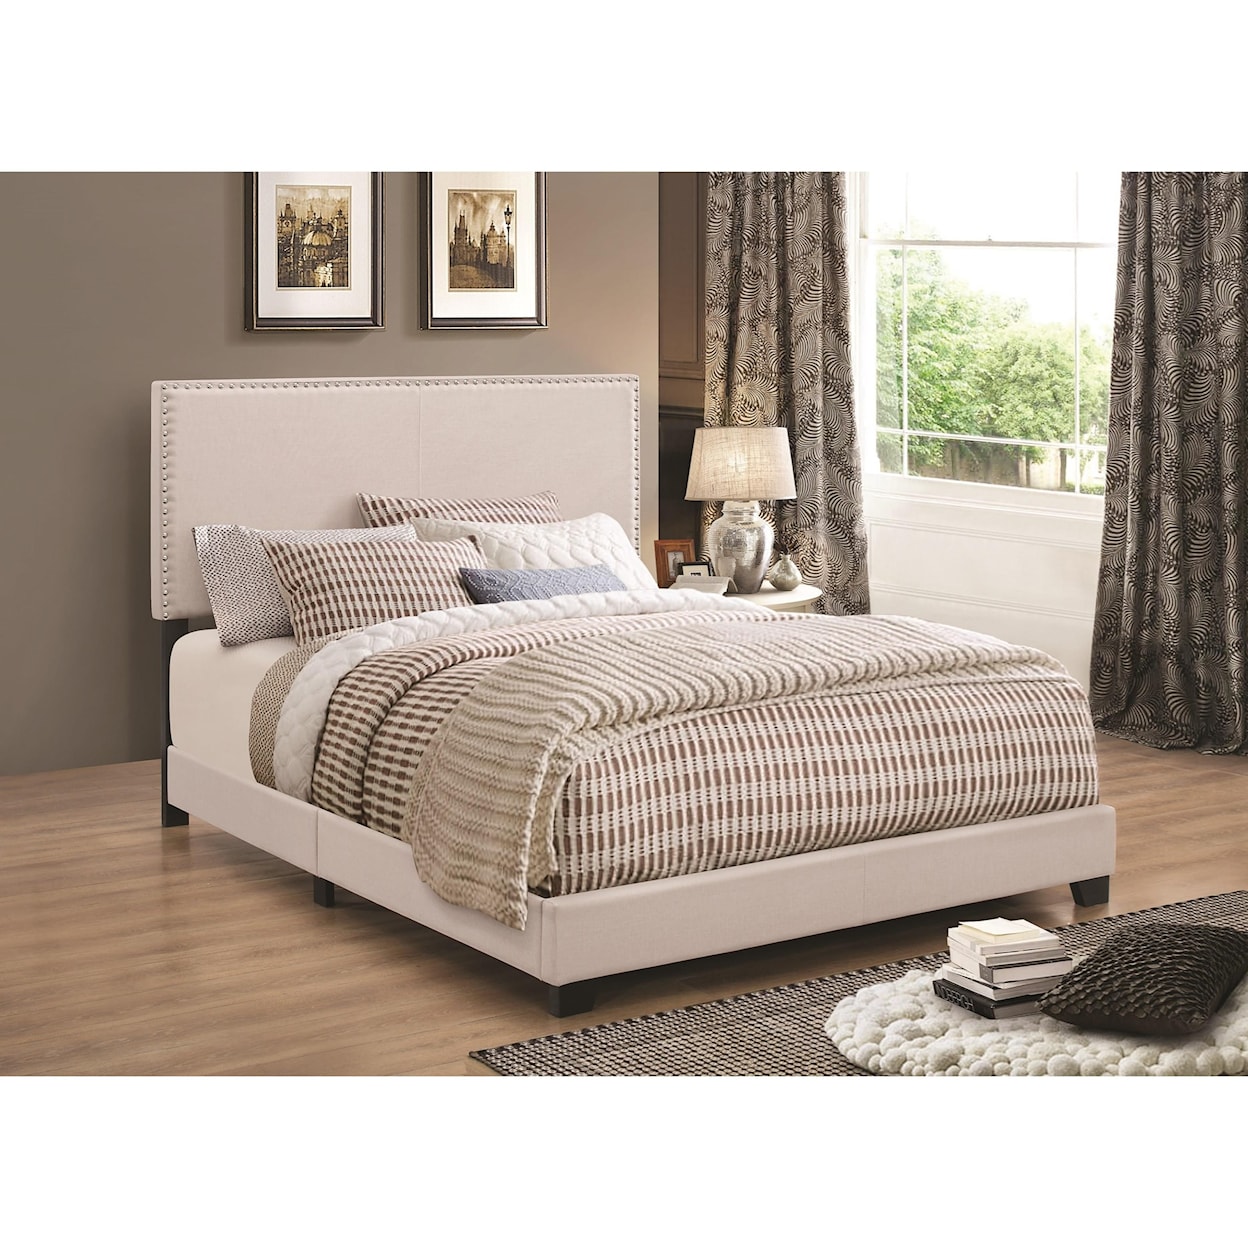 Coaster Upholstered Beds Queen Bed